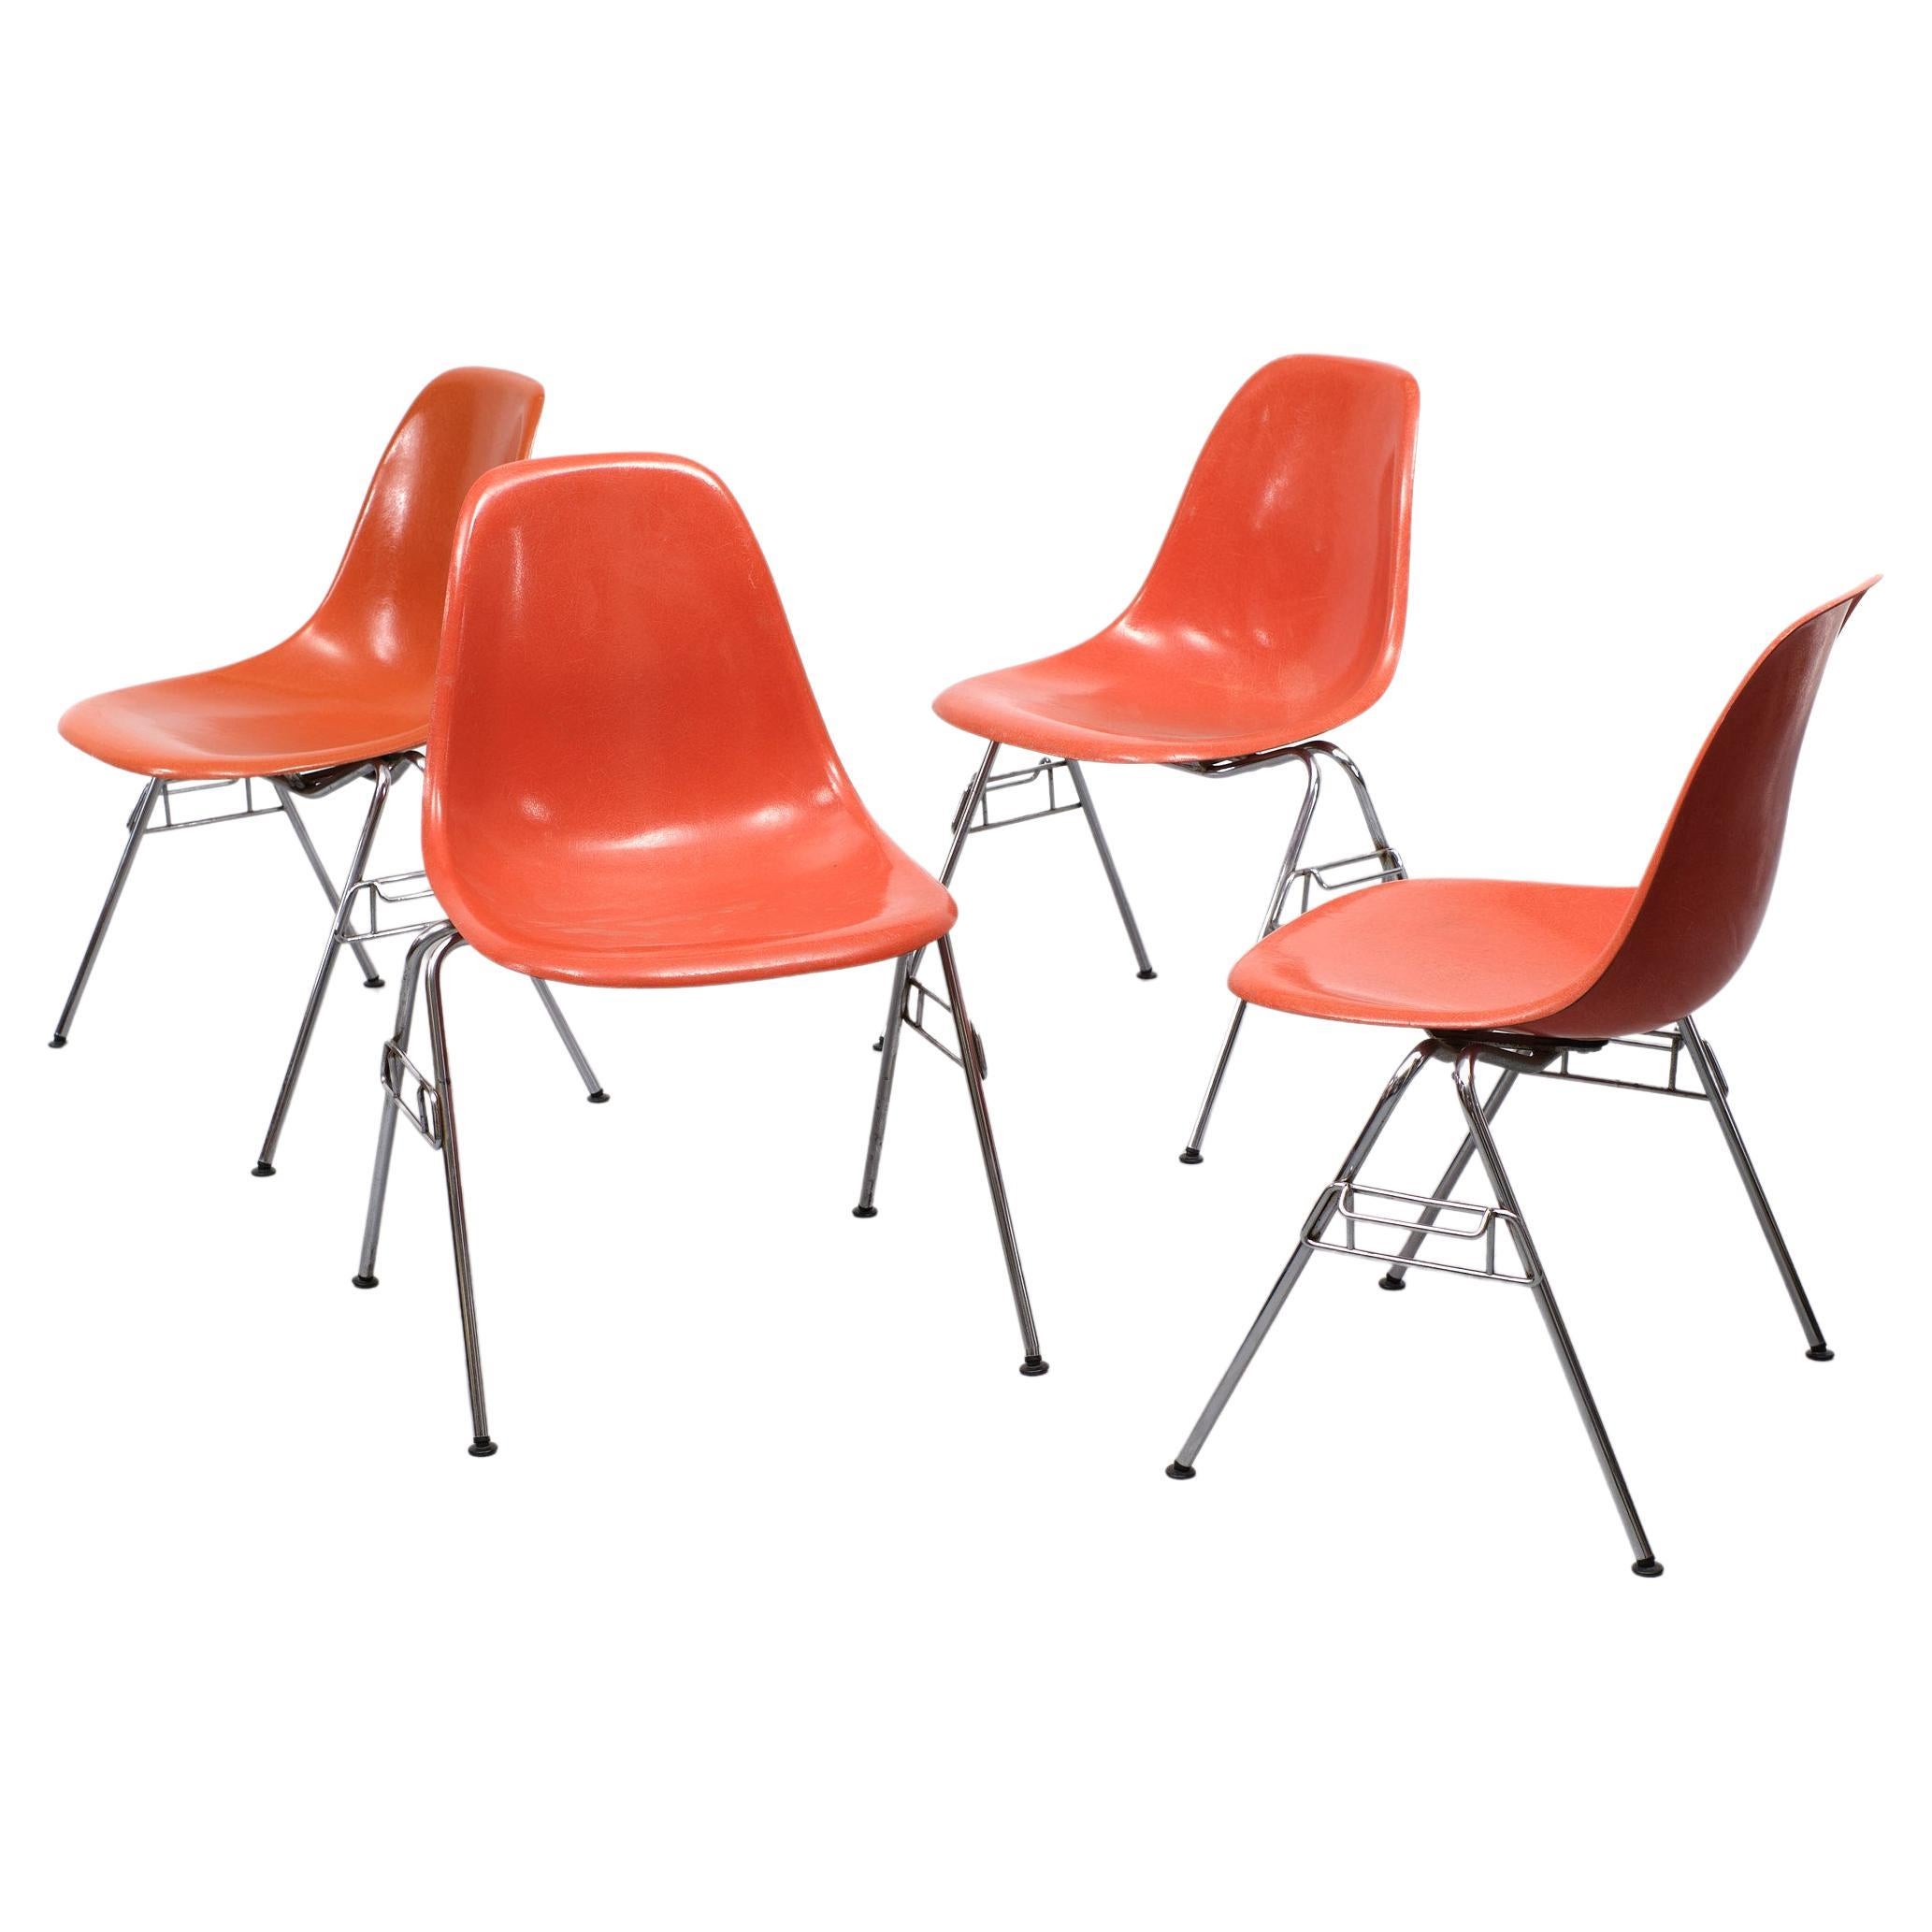 4 DSS Chairs Charles & Ray Eames for Herman Miller, 1974